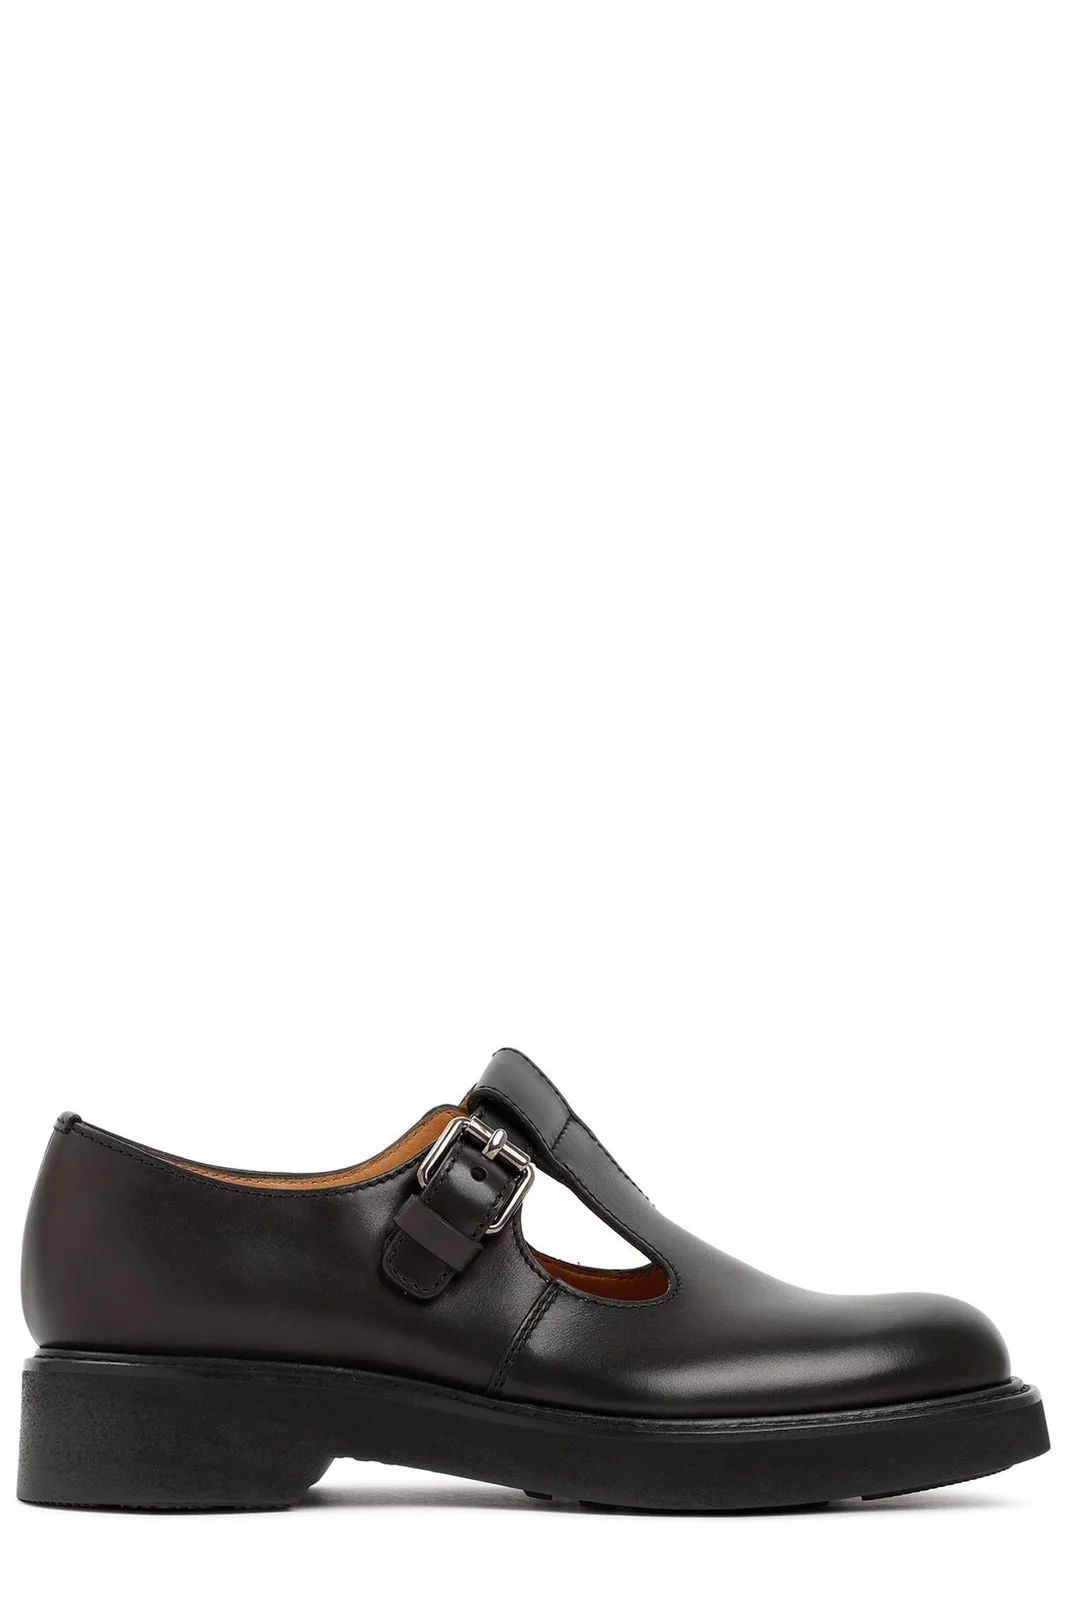 Church's Mary-Jane Buckle Fatsened Loafers | Cettire Global